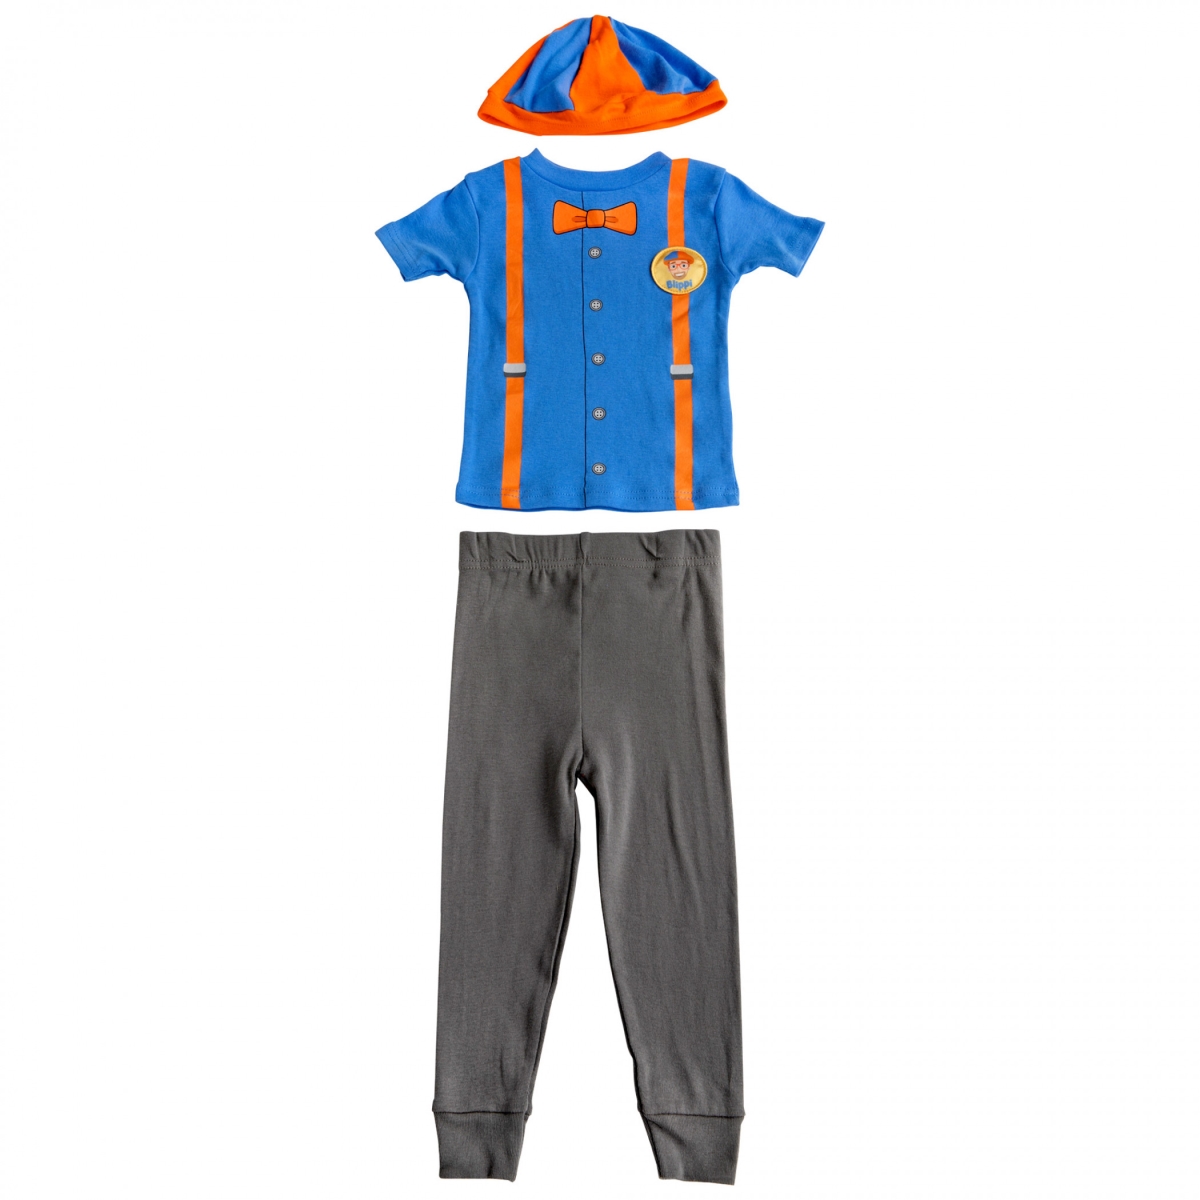 Picture of Blippi 847433-toddler2t Blippi Character Short Sleeve Cosplay Pajama Set - Toddler 2T - 3 Piece